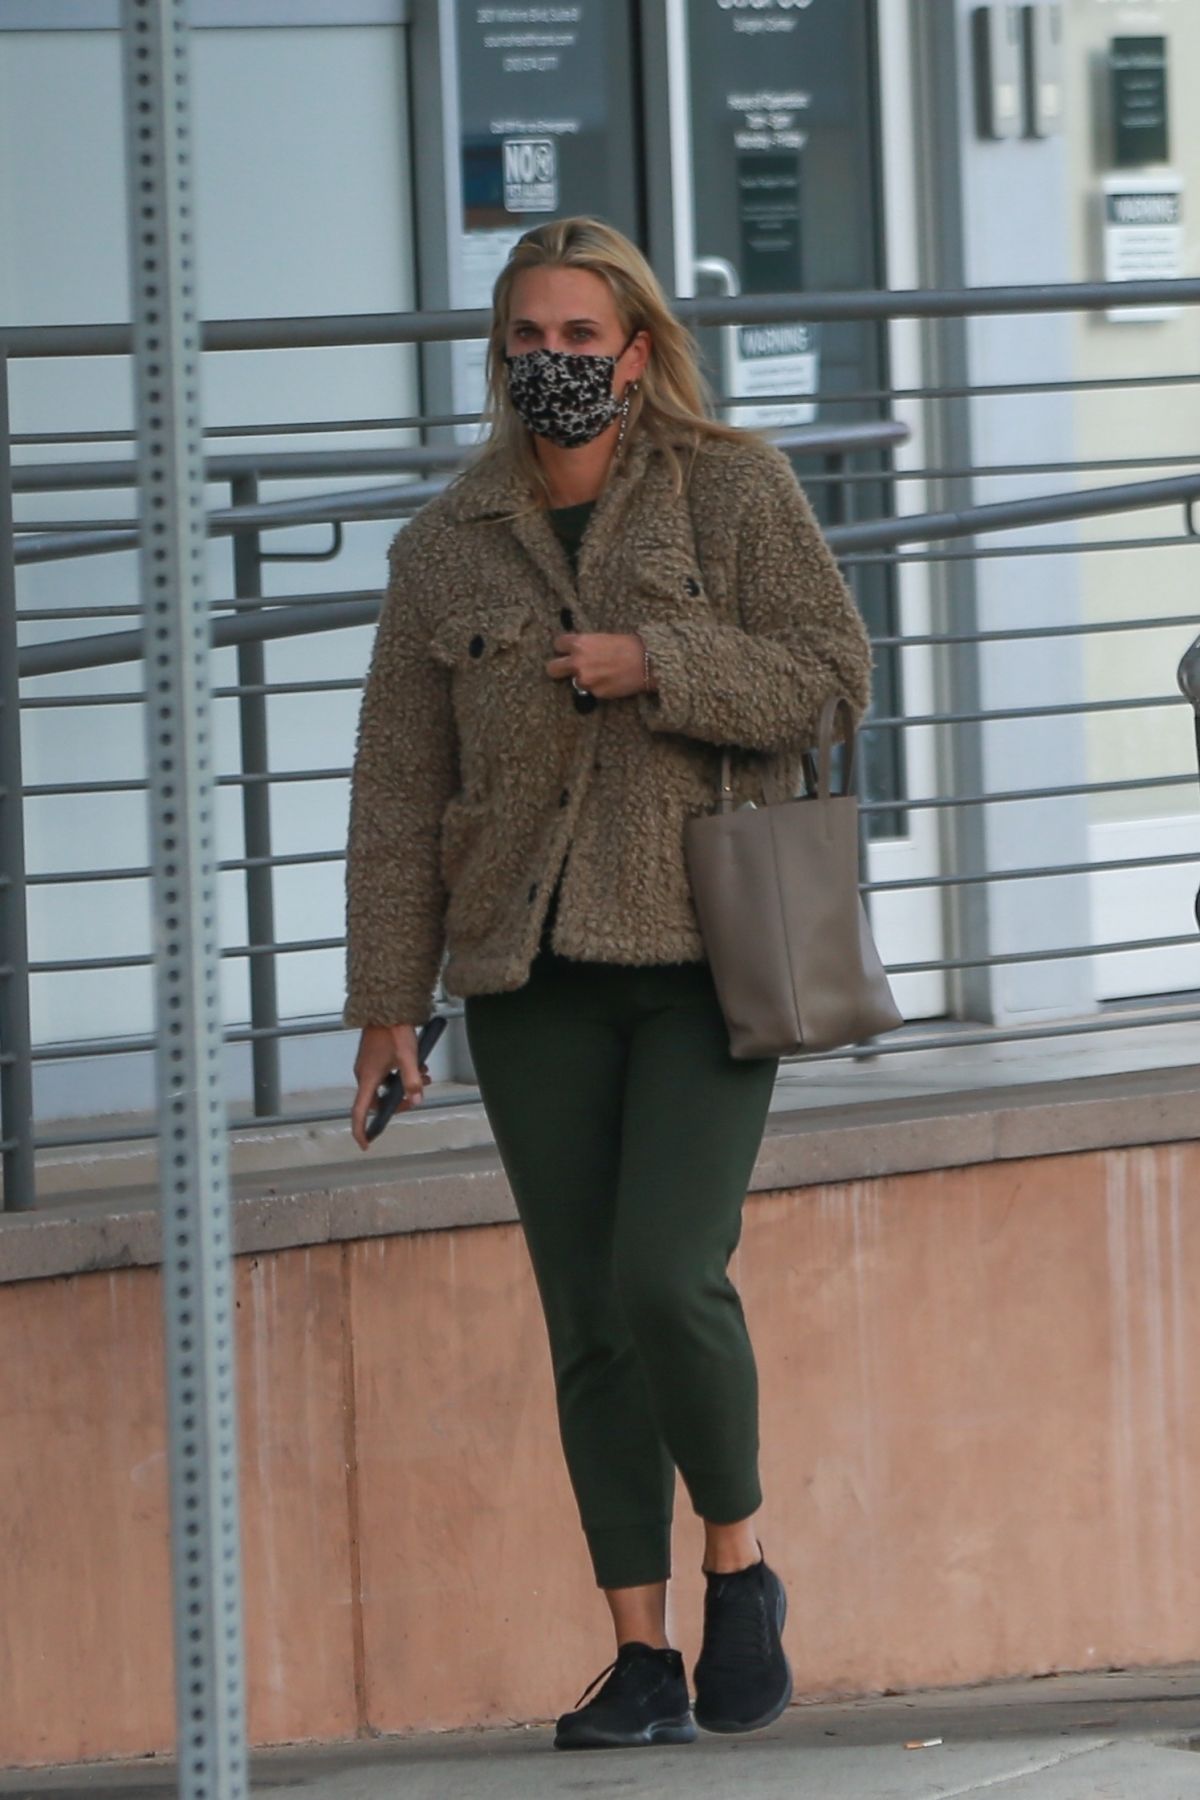 molly-sims-waring-a-face-mask-out-in-santa-monica-01-05-2021-6.jpg